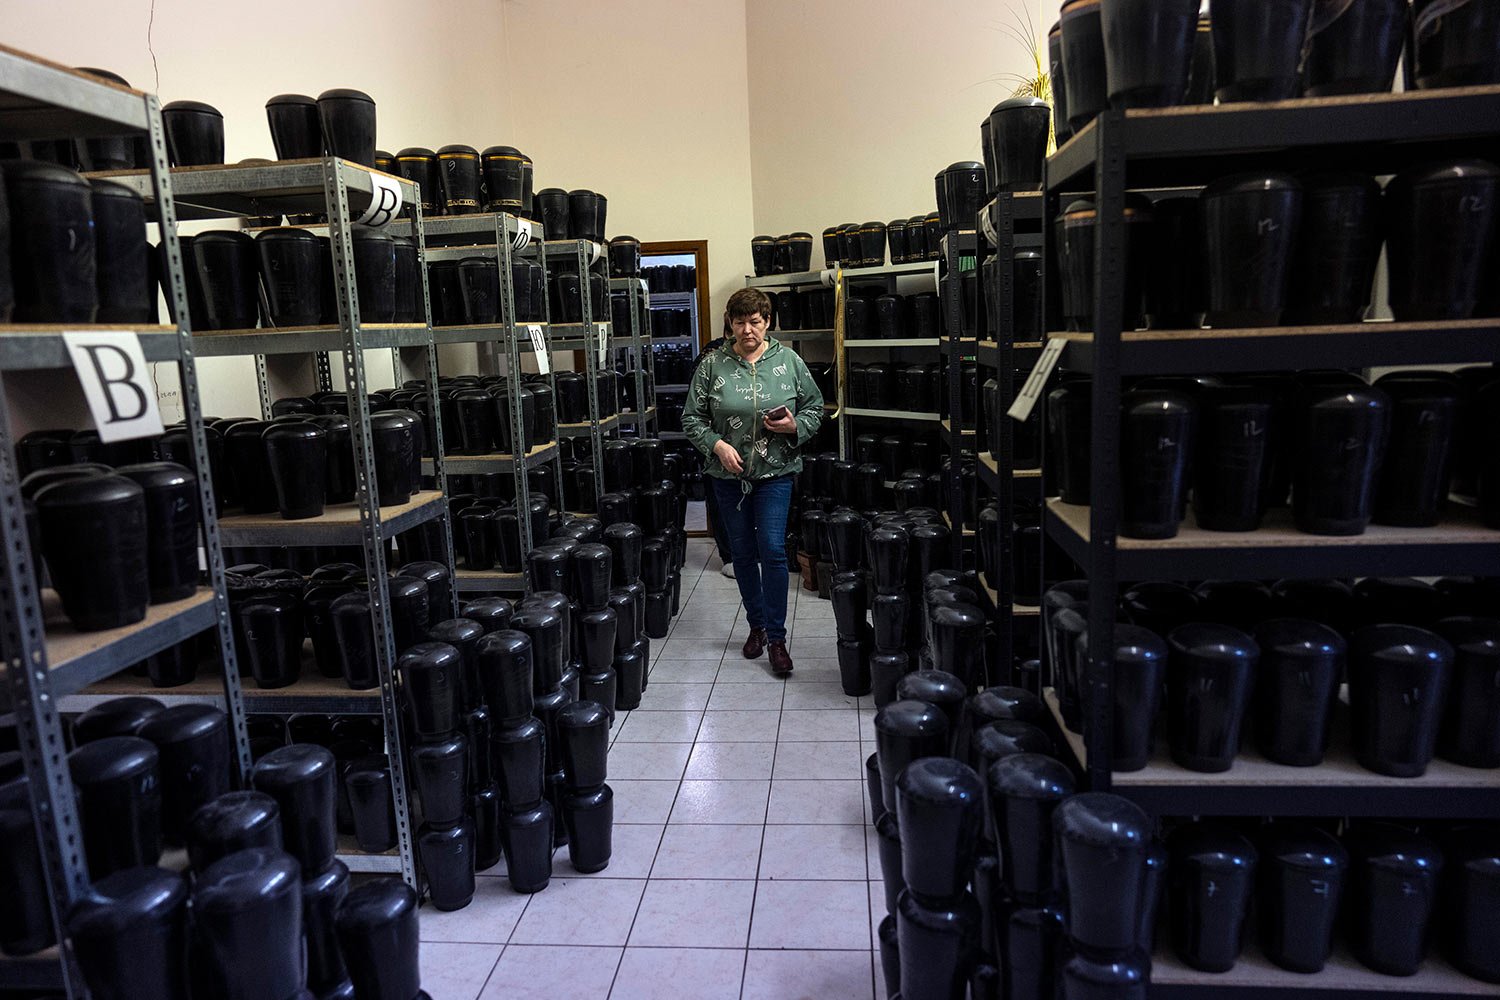  A cemetery worker walks amid marble urns that contains the cremated remains of people inside Baikove's cemetery offices, in Kyiv, Ukraine, Thursday, March 24, 2022. (AP Photo/Rodrigo Abd) 